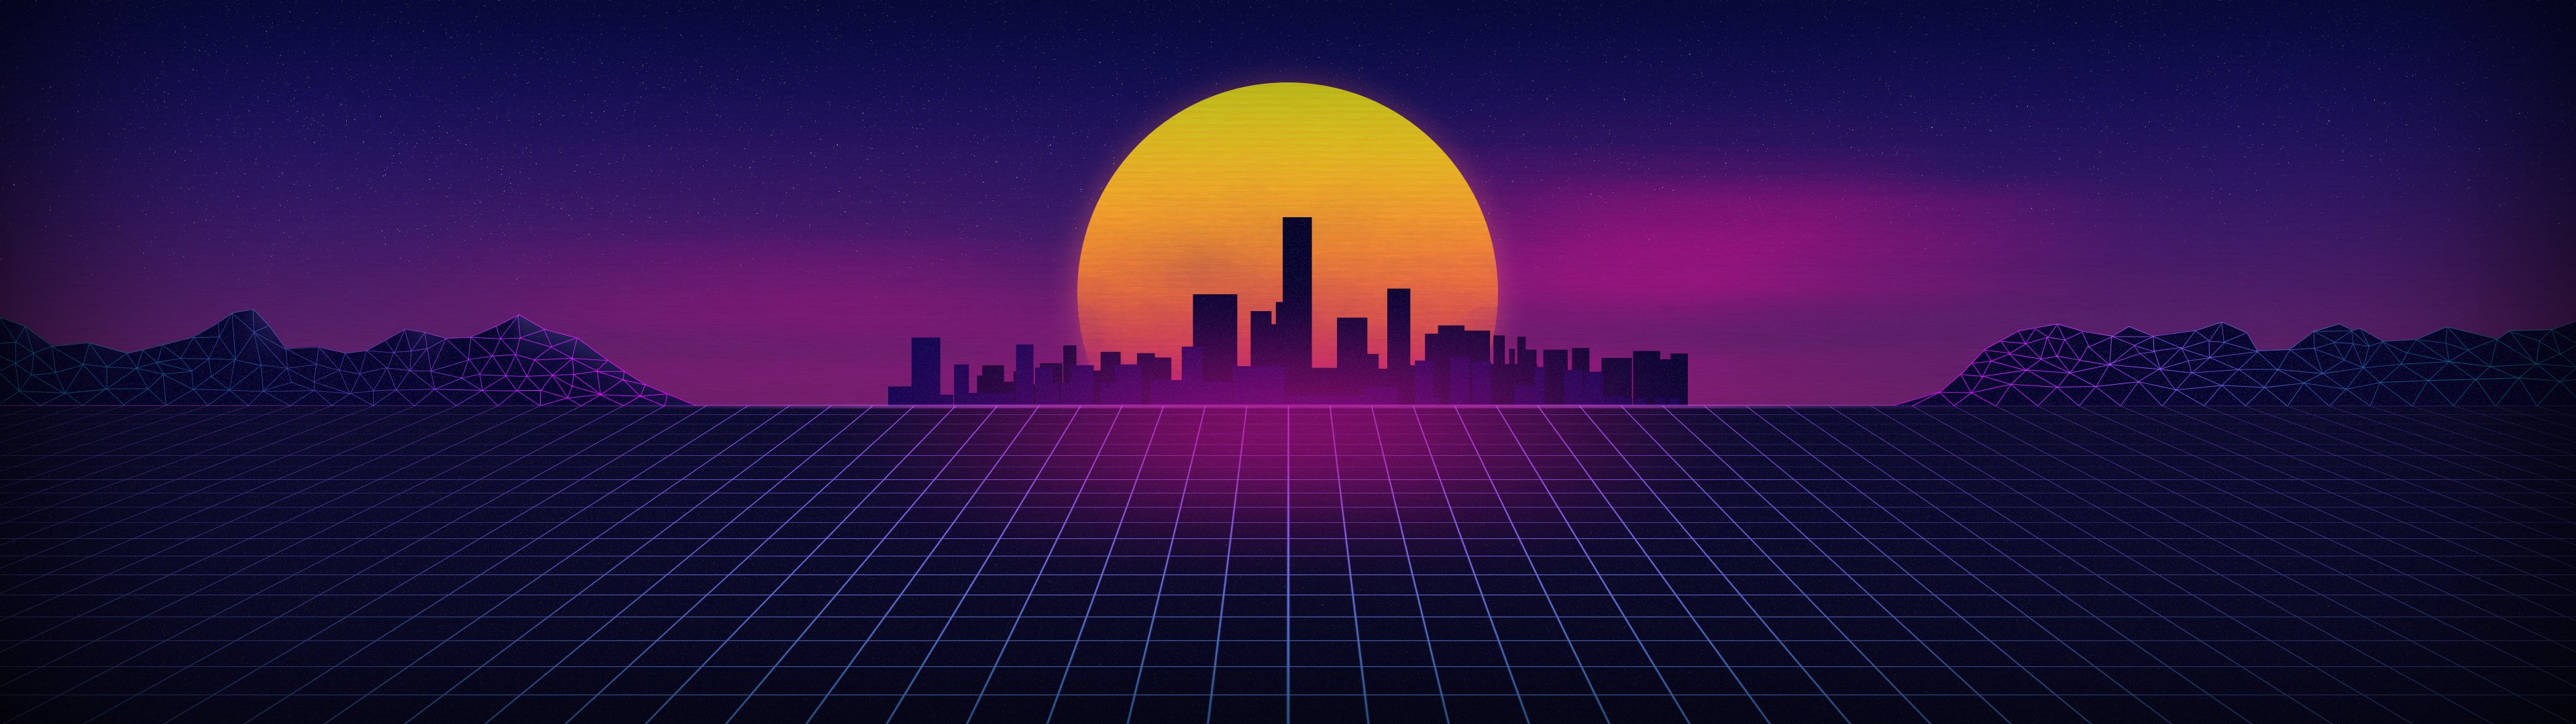 Retro Dual Monitor Wallpapers Wallpapers